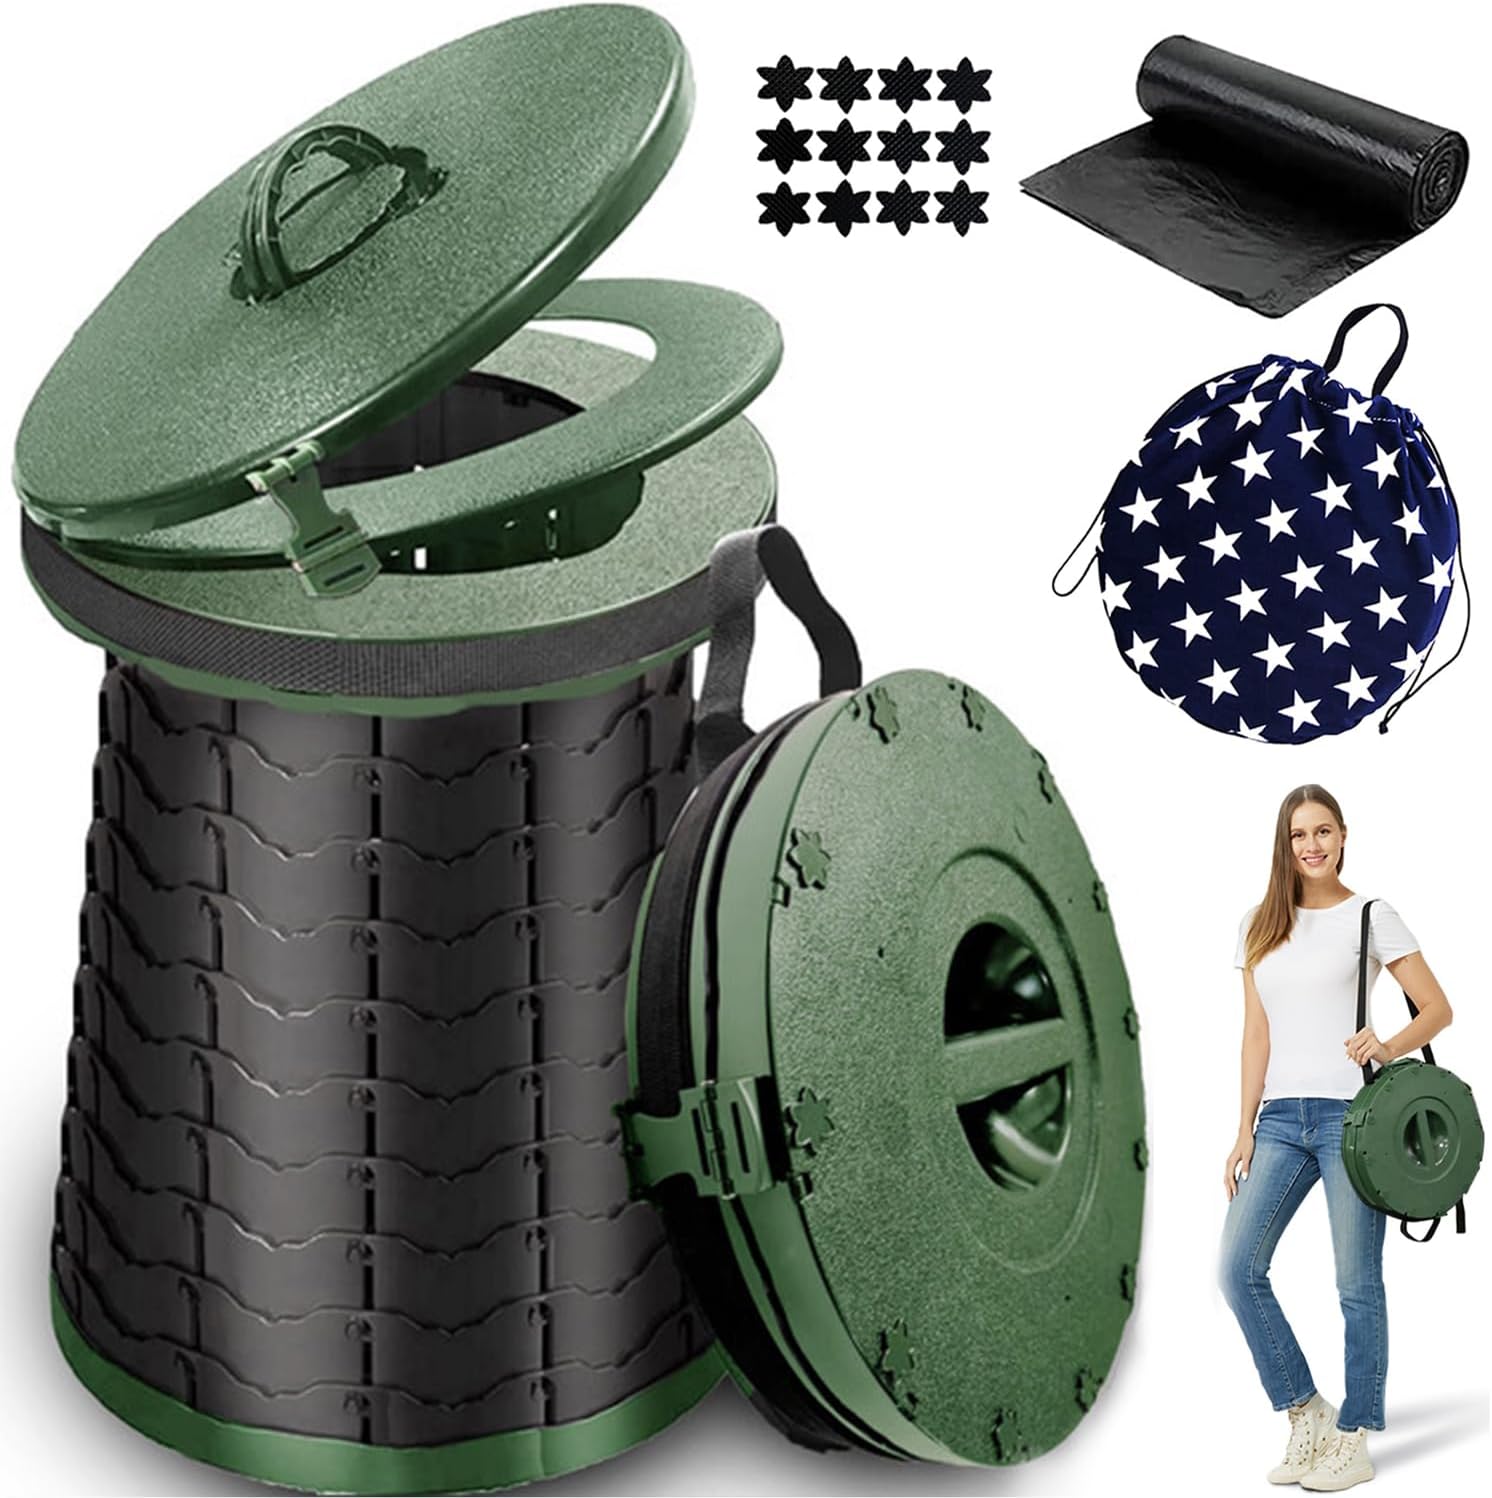 Upgrade Adjustable Foldable Outdoor Portable Toilet